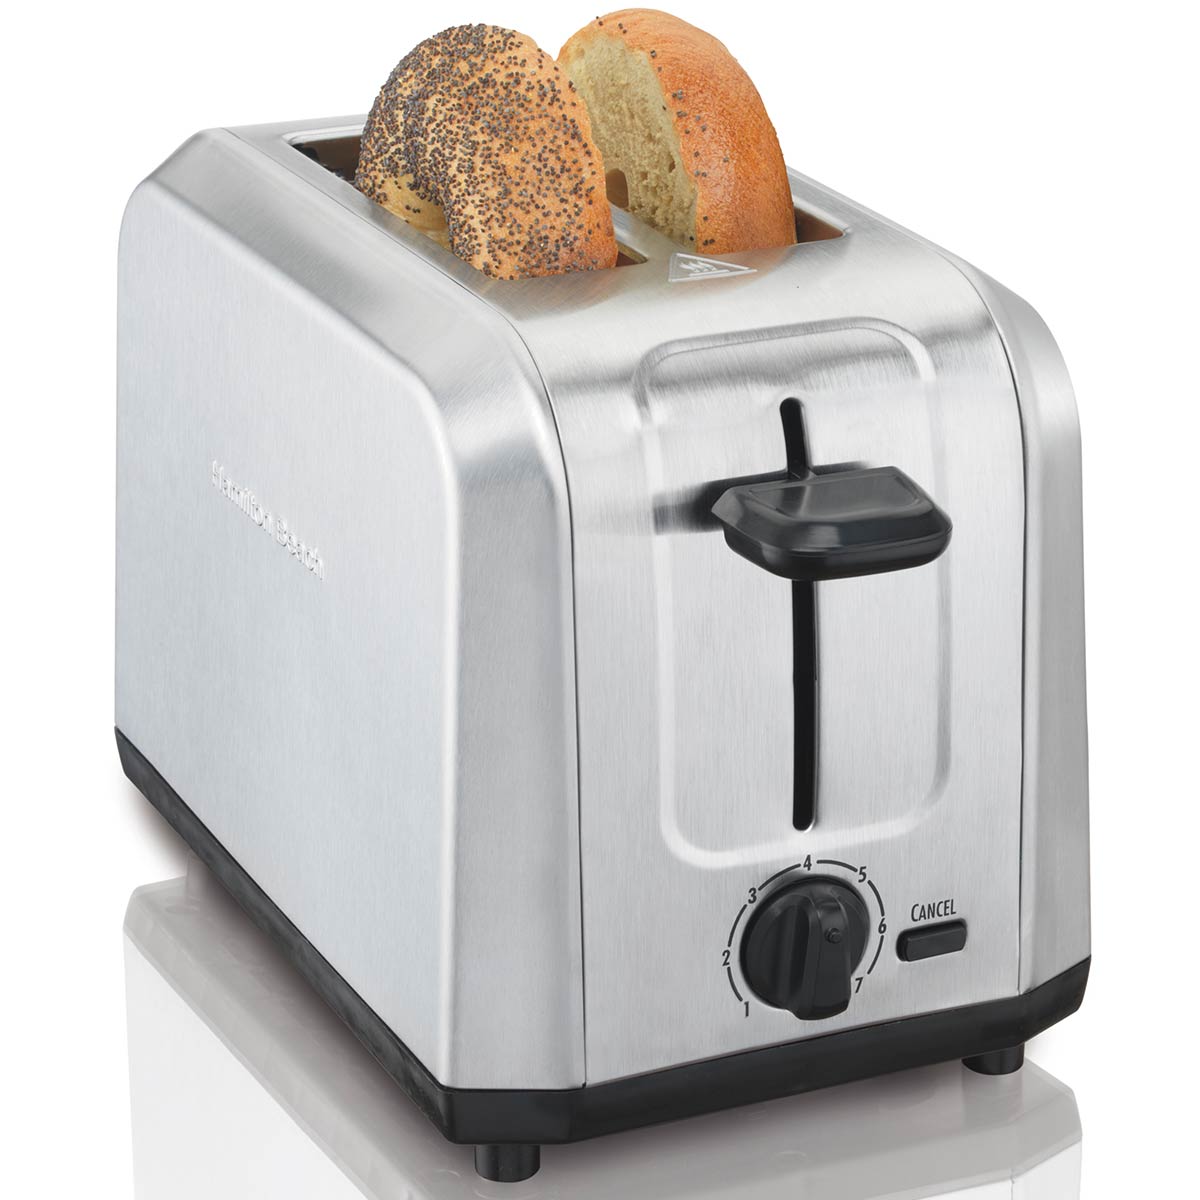 Brushed Stainless Steel 2-Slice Toaster (22910)